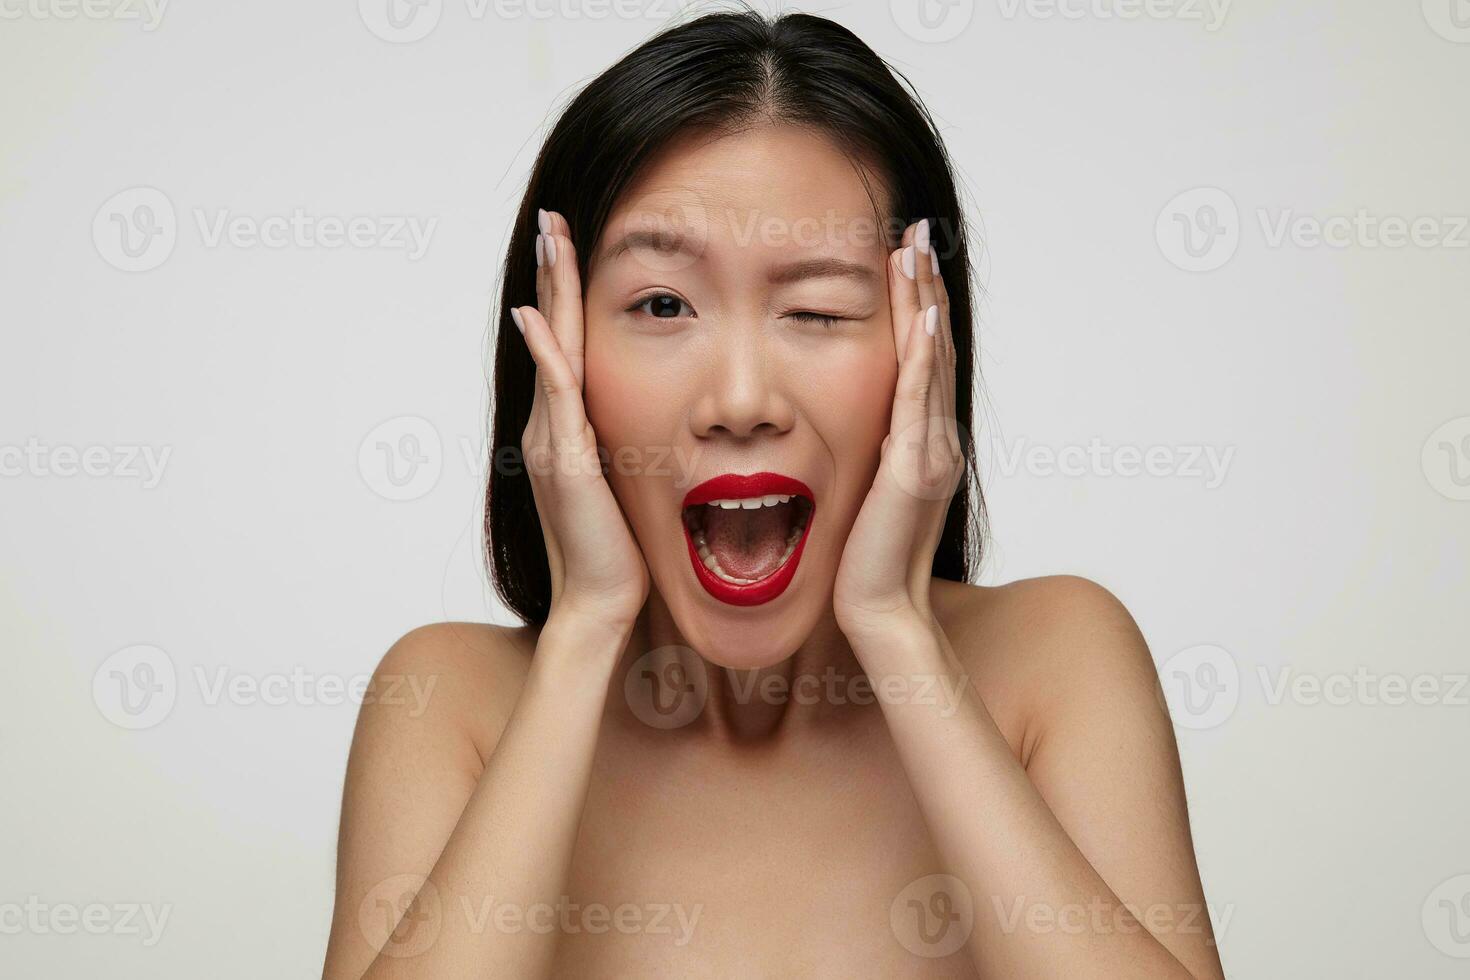 Indoor photo of young agitated dark haired woman holding her face with raised palms while looking excitedly at camera with closed eye, standing over white background